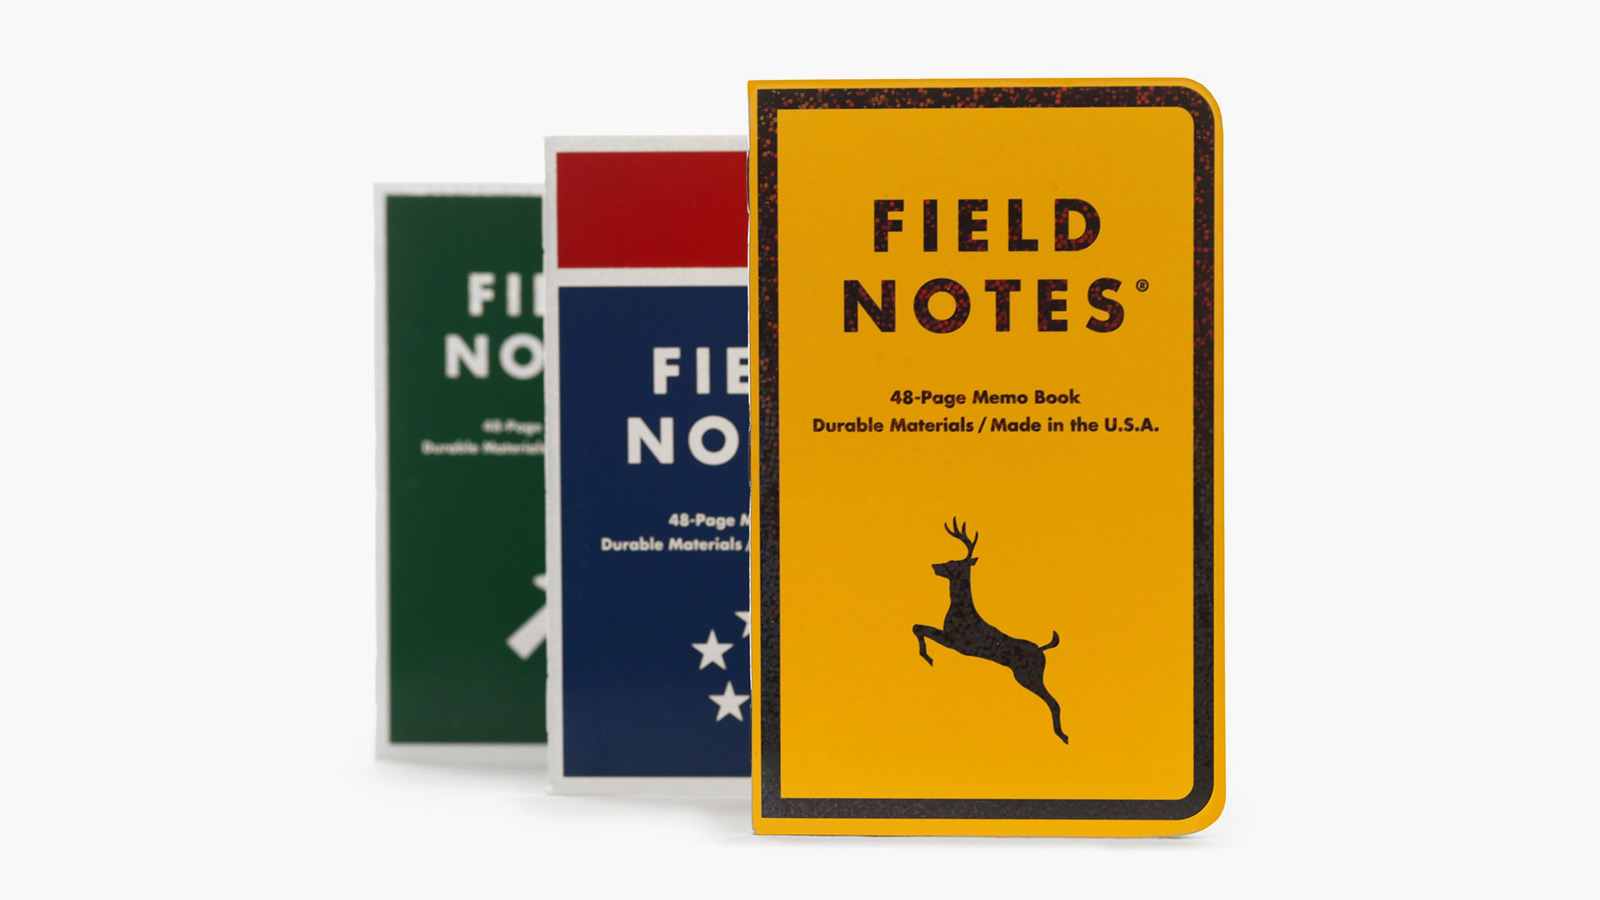 Field Notes Mile Marker Edition